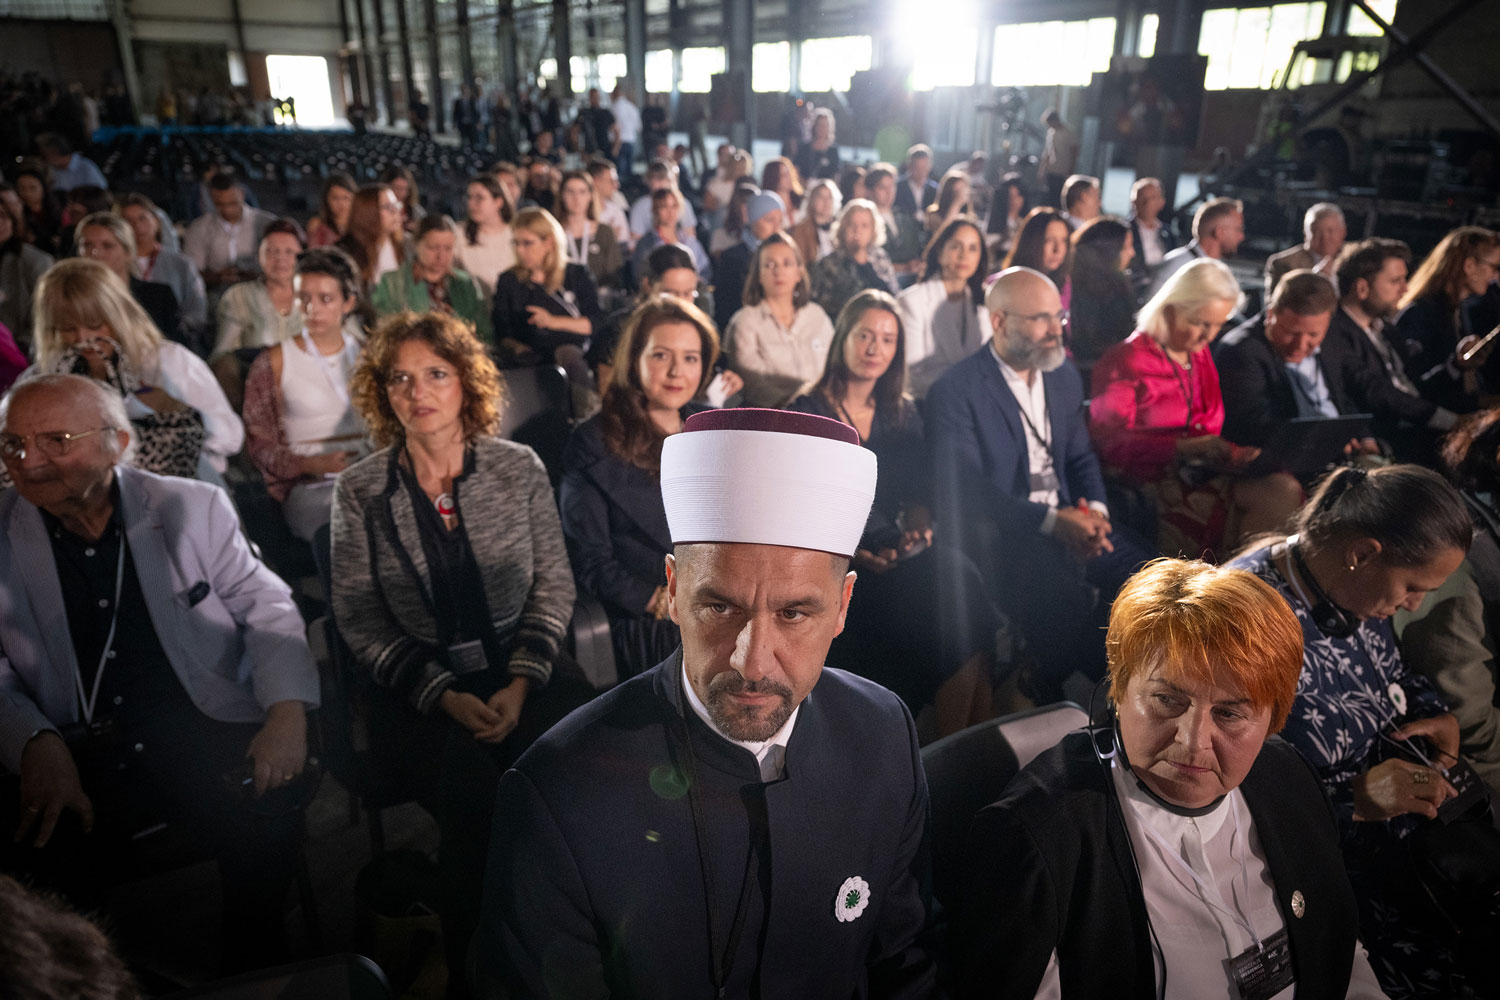 Attendees join together for a presentation during the Srebrenica Genocide Commemoration in early July in Bosnia. Photo by Shahar Azran/WJC